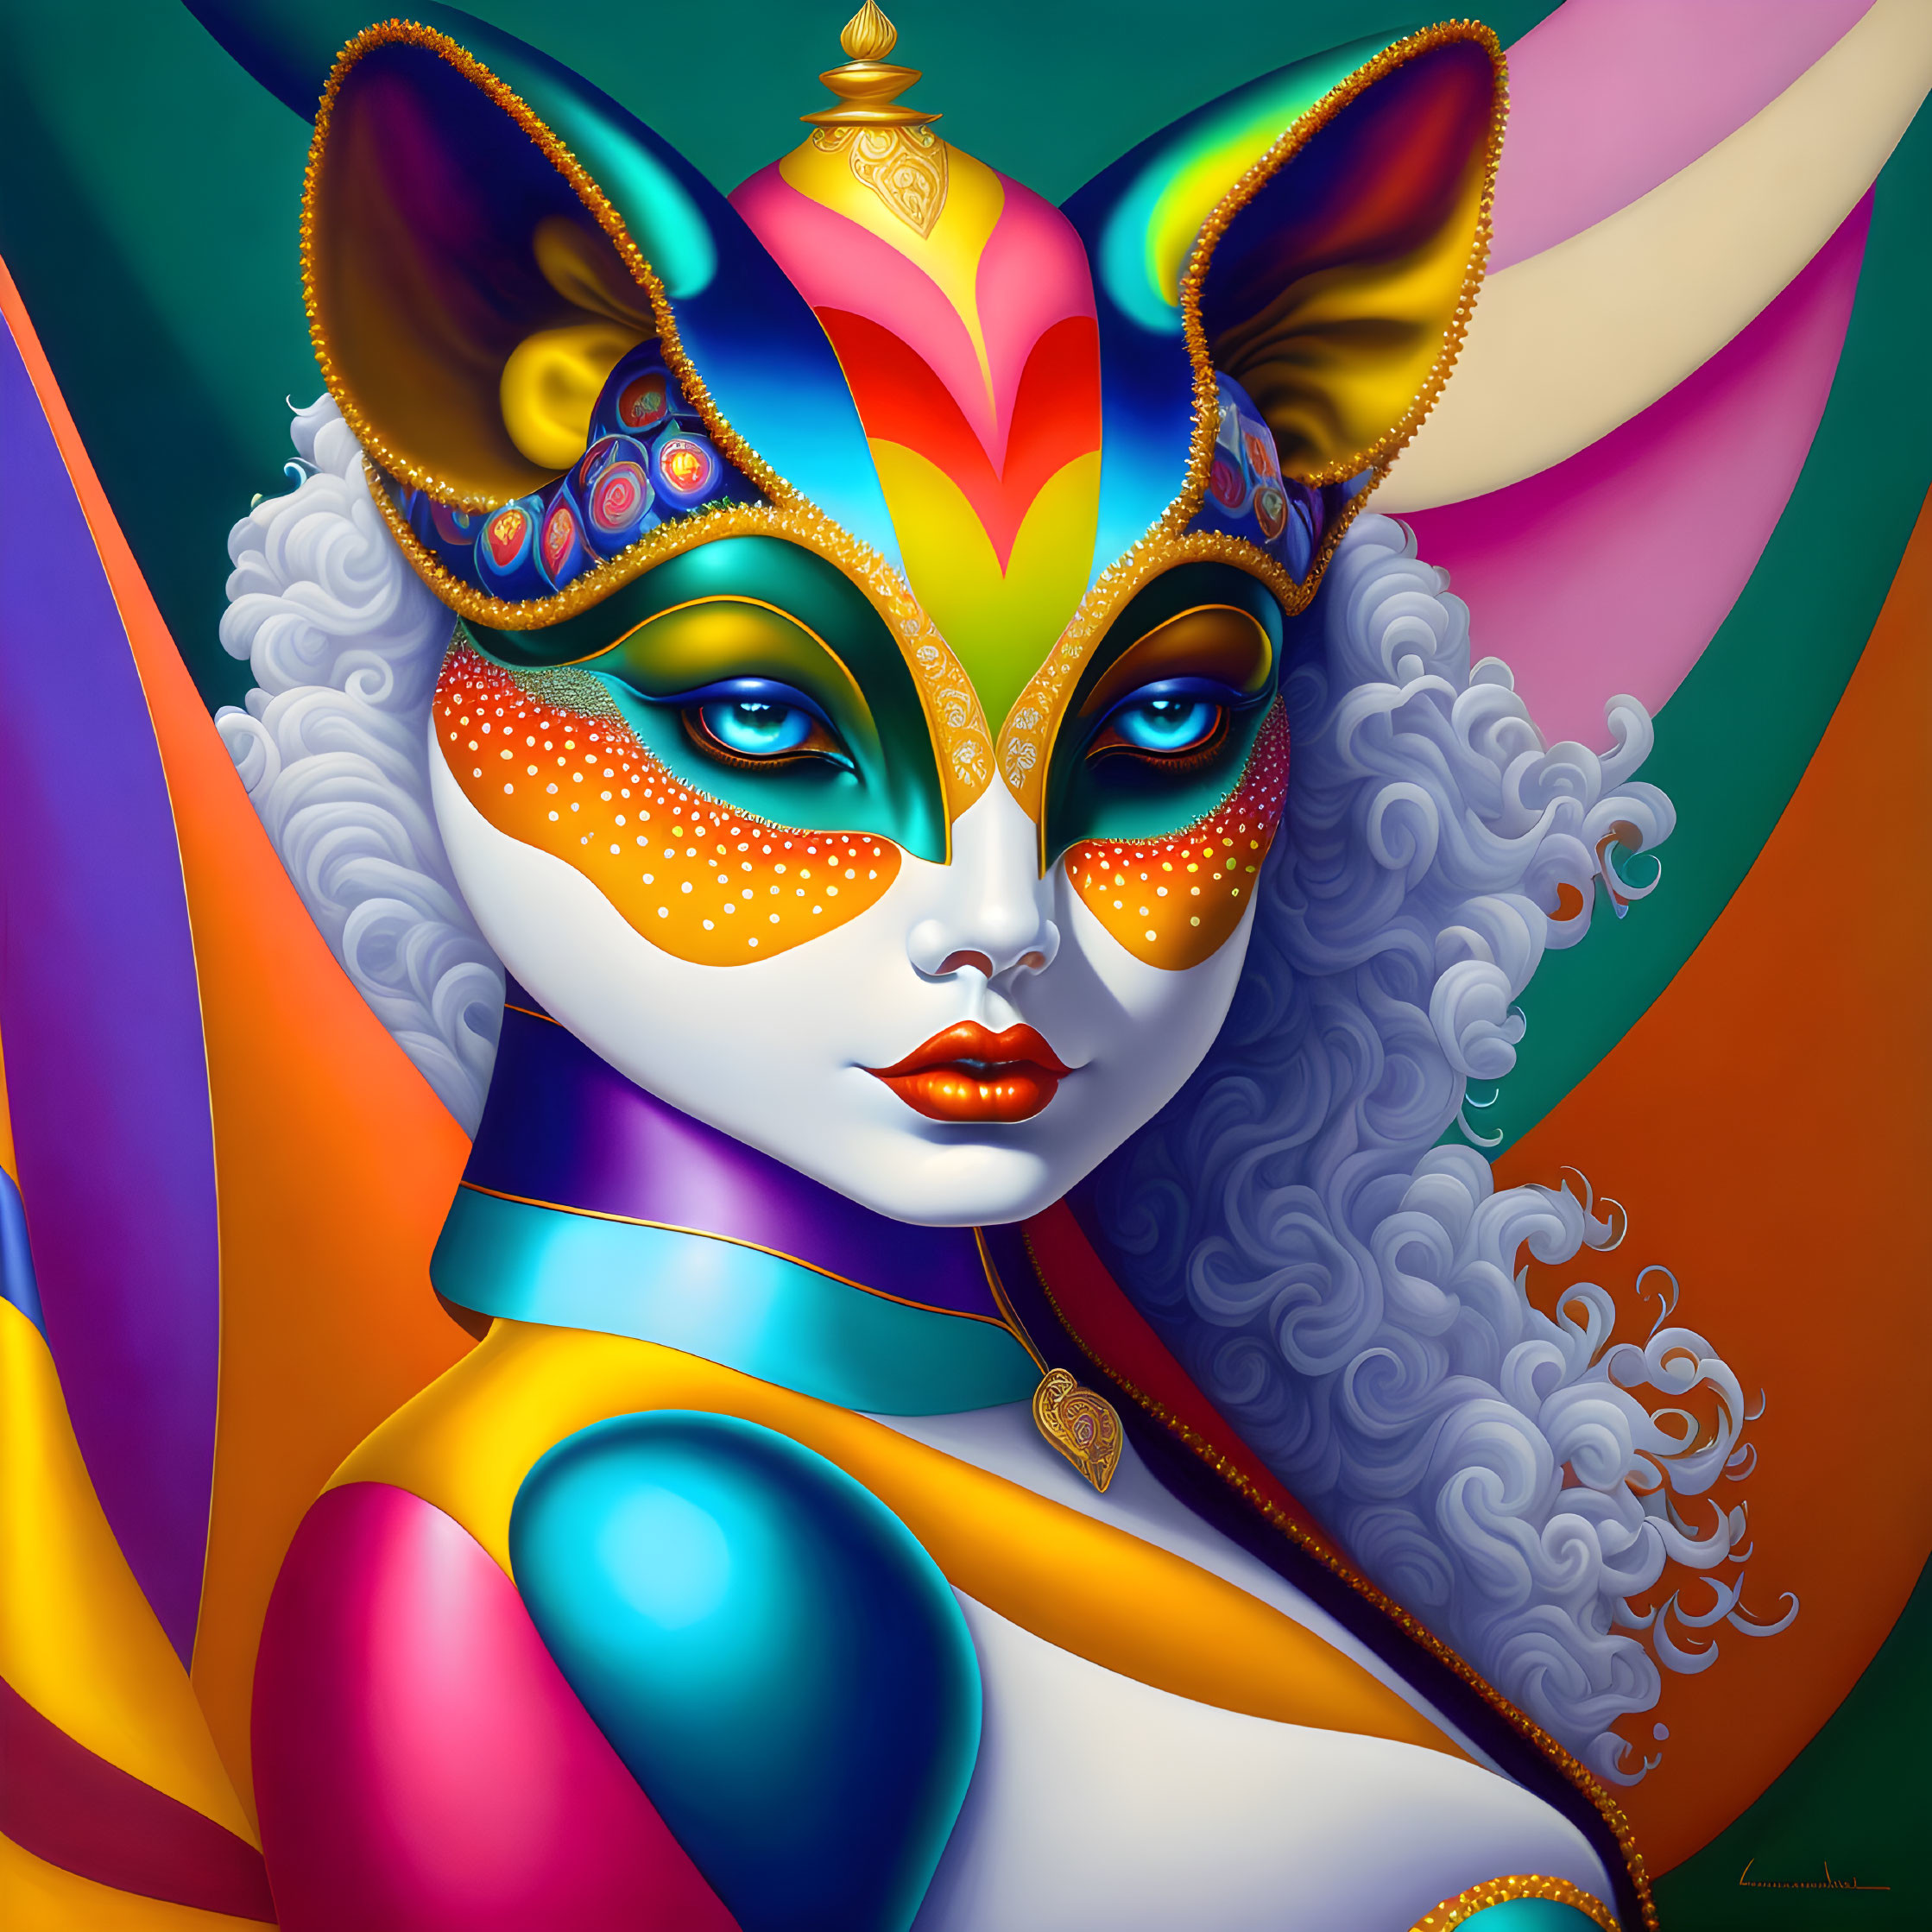 Colorful Illustration of Person with Cat-Like Features in Festive Costume